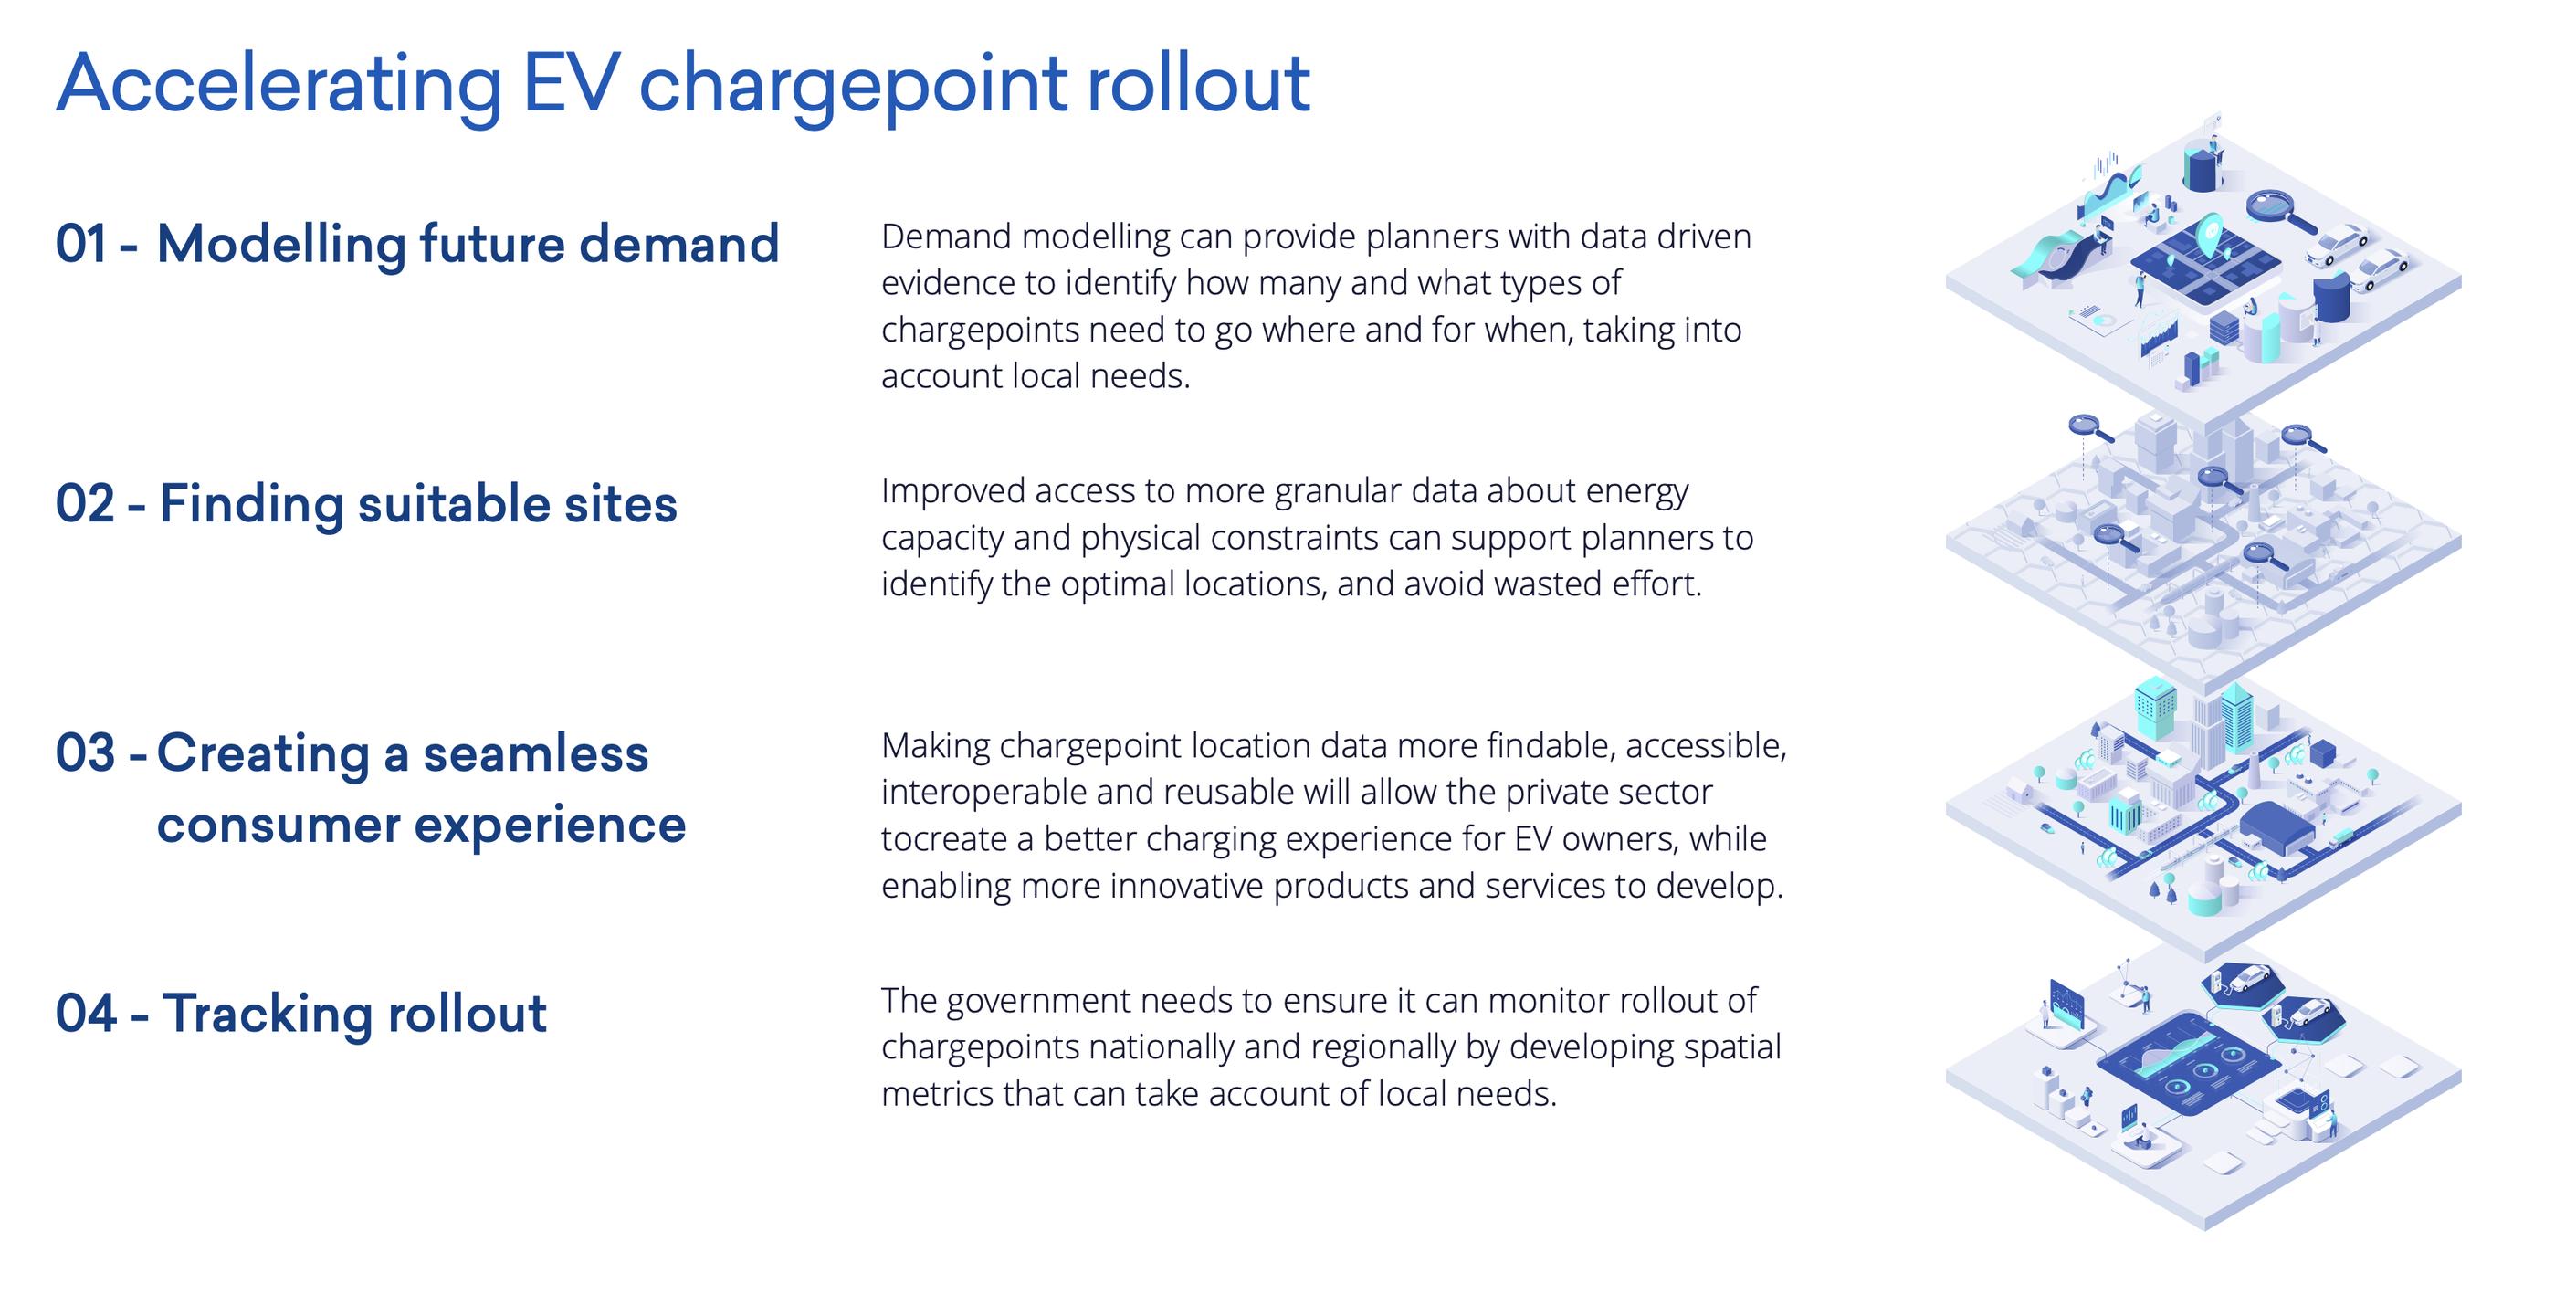 Location data is key to EV chargepoint roll-out